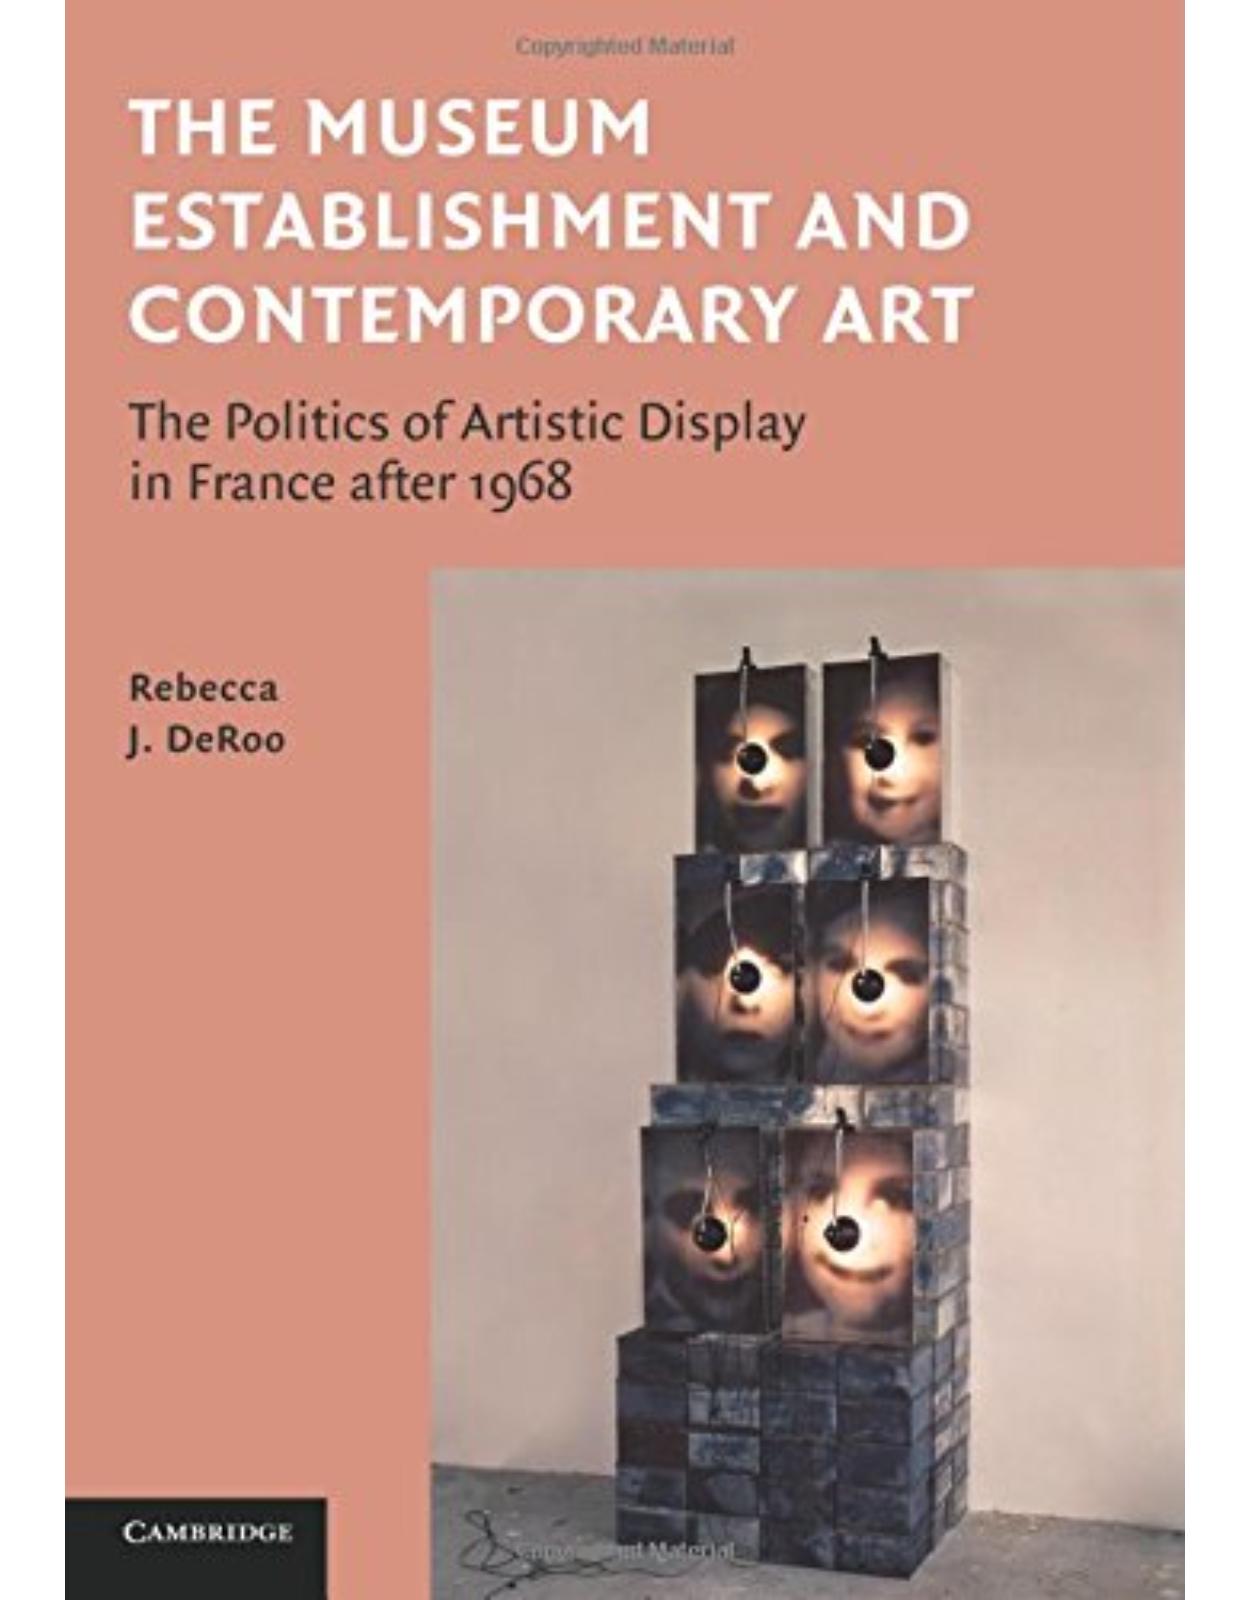 The Museum Establishment and Contemporary Art: The Politics of Artistic Display in France after 1968